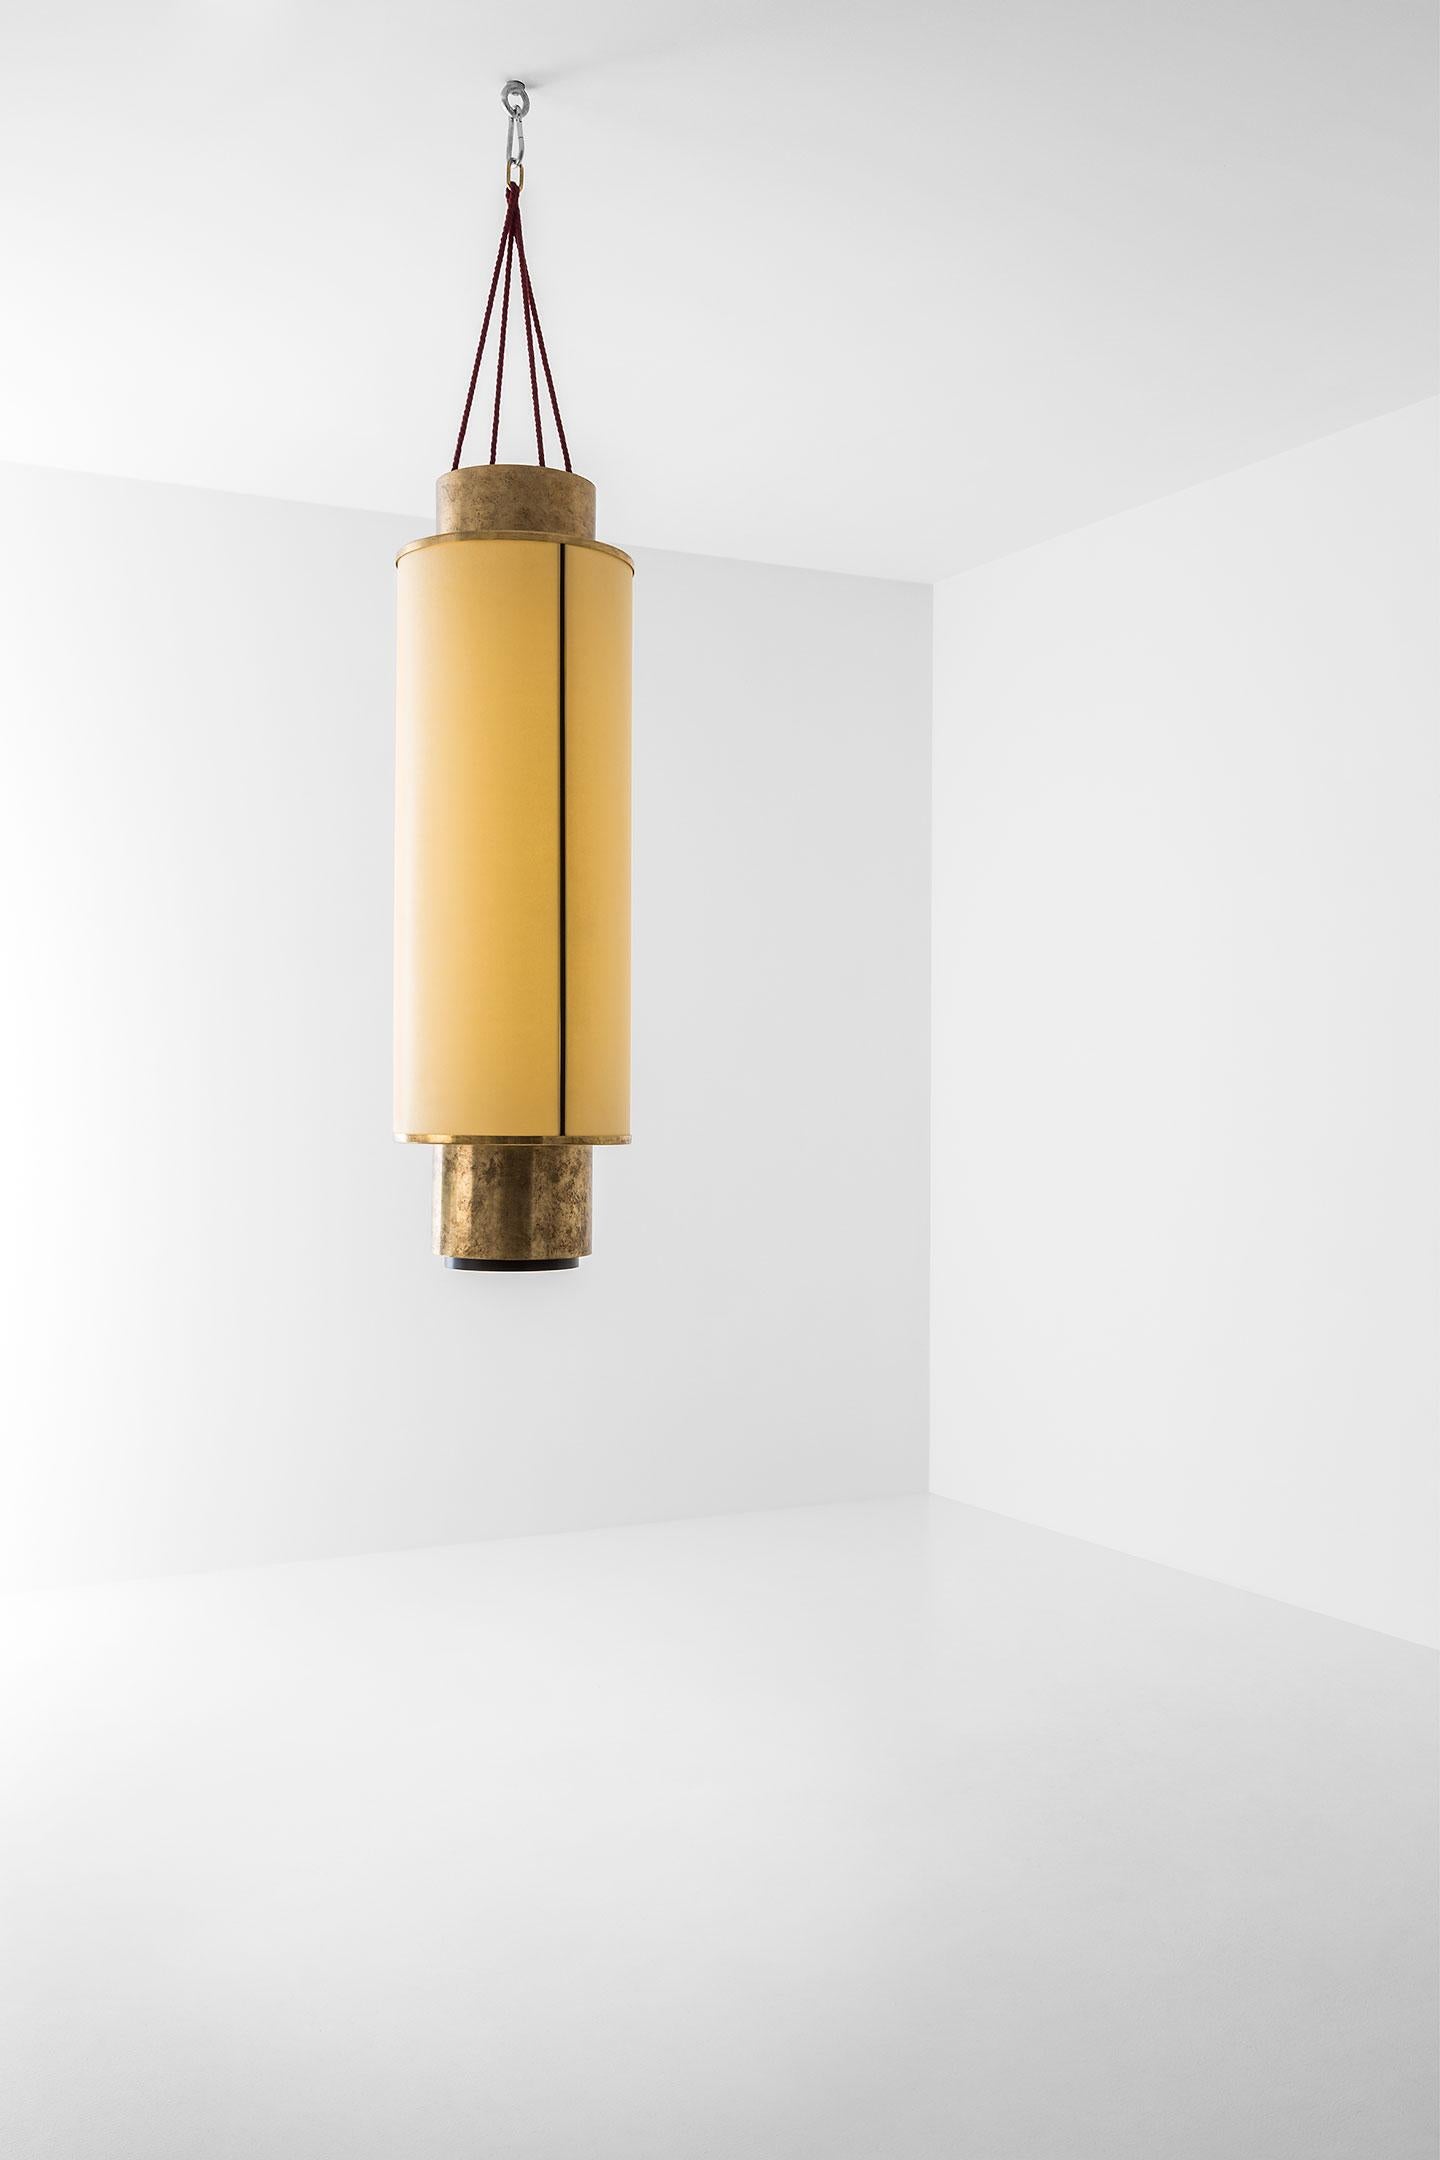 Dimmable ceiling lamp in matte black painted metal and polished oxidised brass.
Lampshade in parchment paper. Red cotton cord.
Dimoremilano collection by Dimorestudio
22% VAT will be added on European orders.